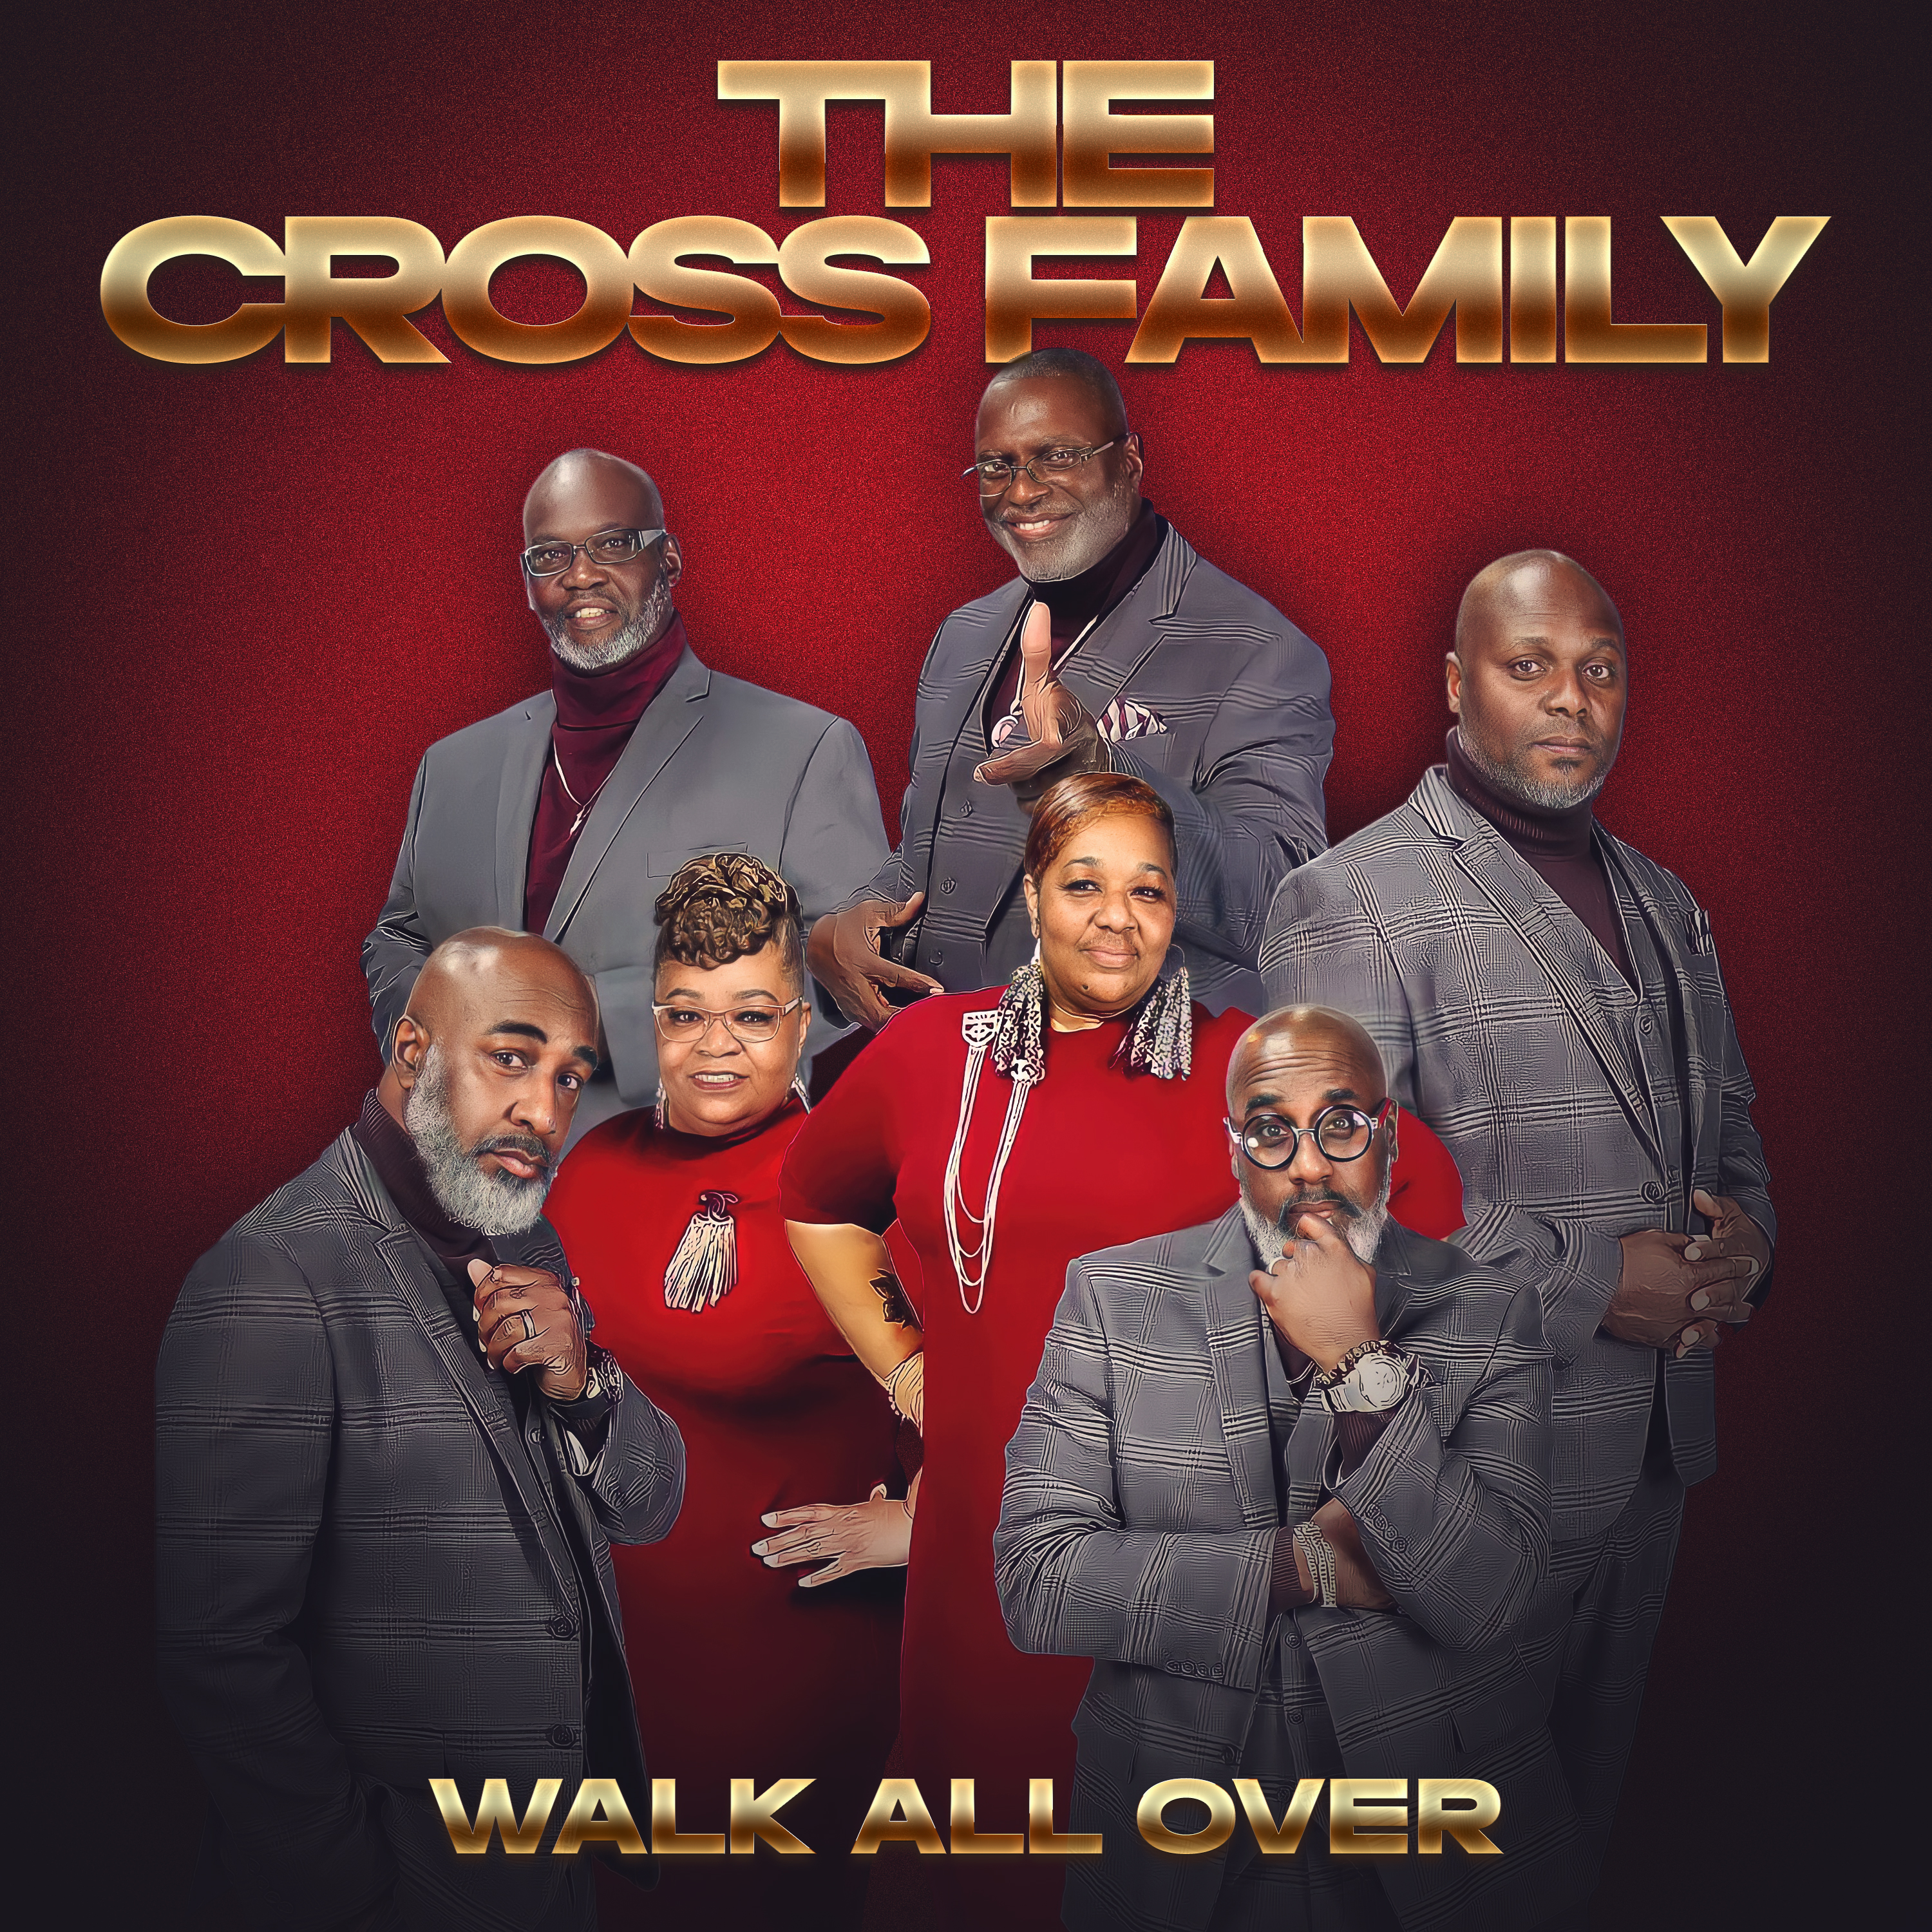 Art for Walk All Over by The Cross Family